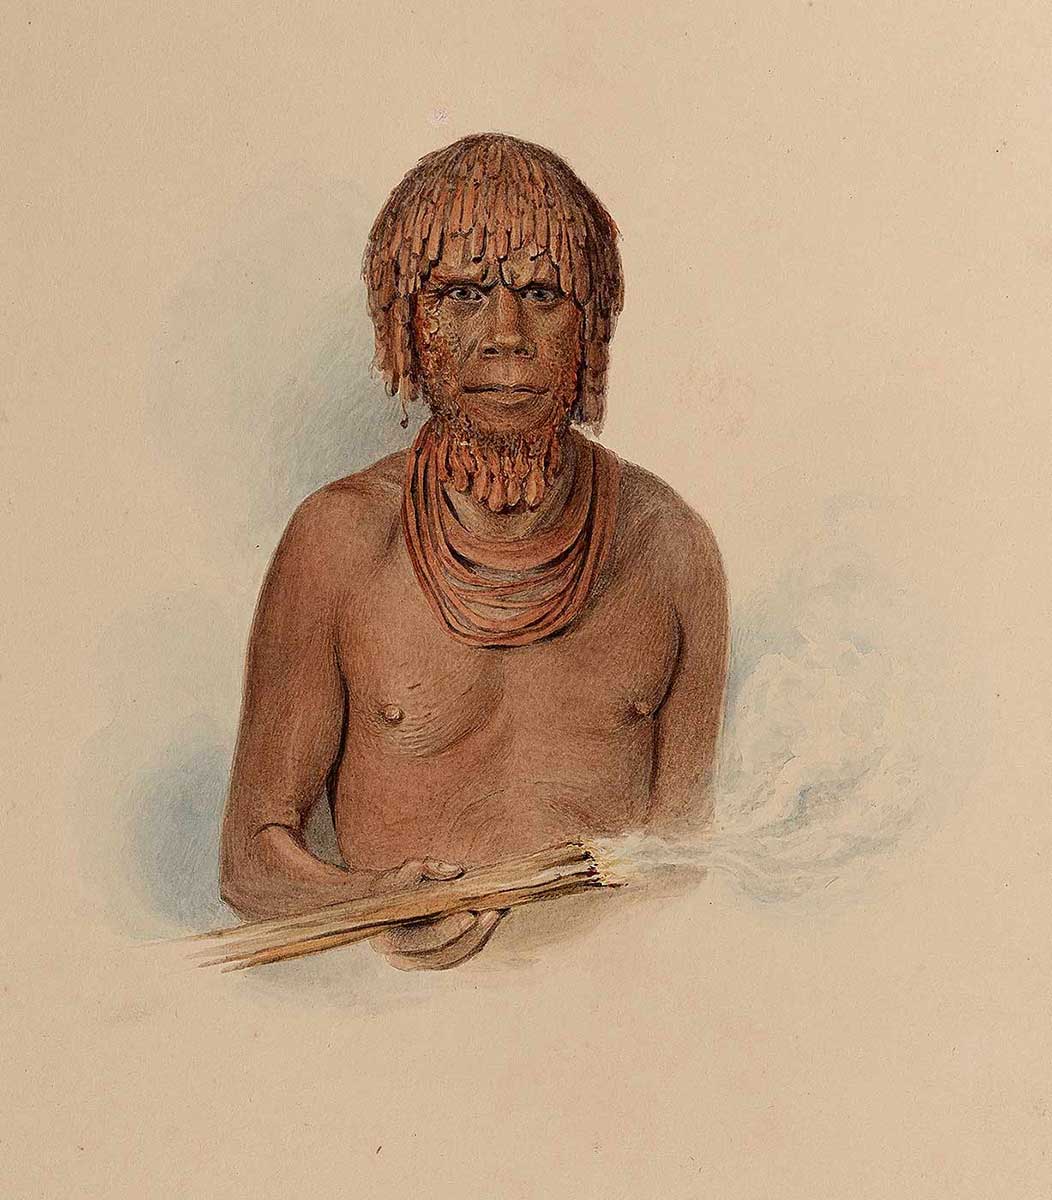 Watercolour painting featuring an Aboriginal man with dressed hair and beard; he is wearing necklaces and holding a fire stick. - click to view larger image